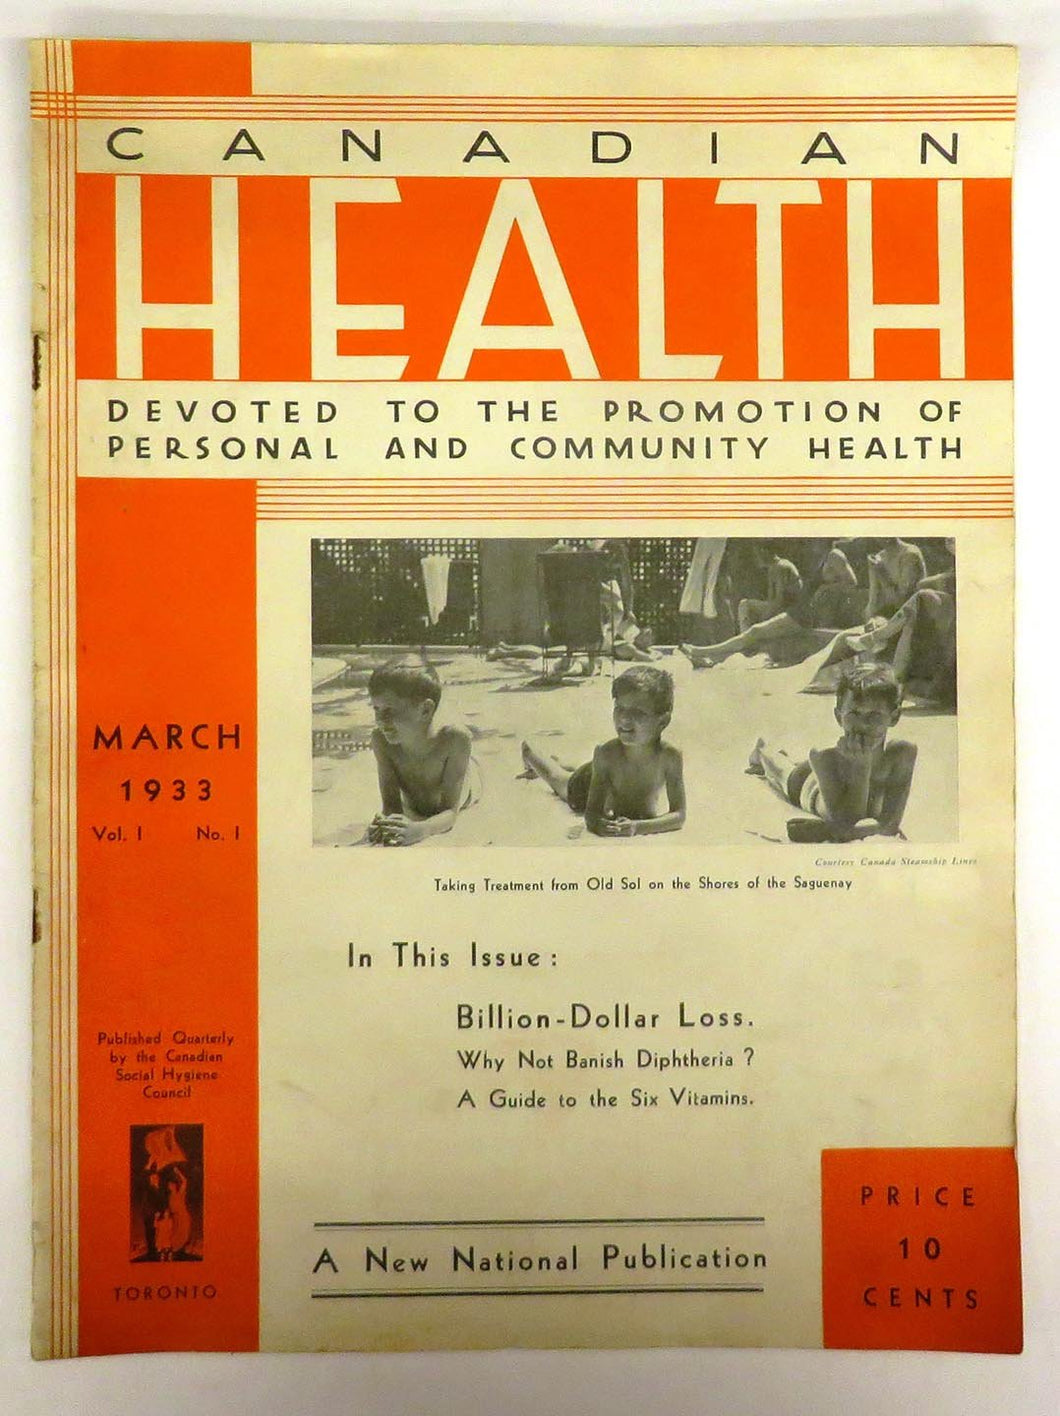 Canadian Health: Devoted to the promotion of personal and community health, March 1933